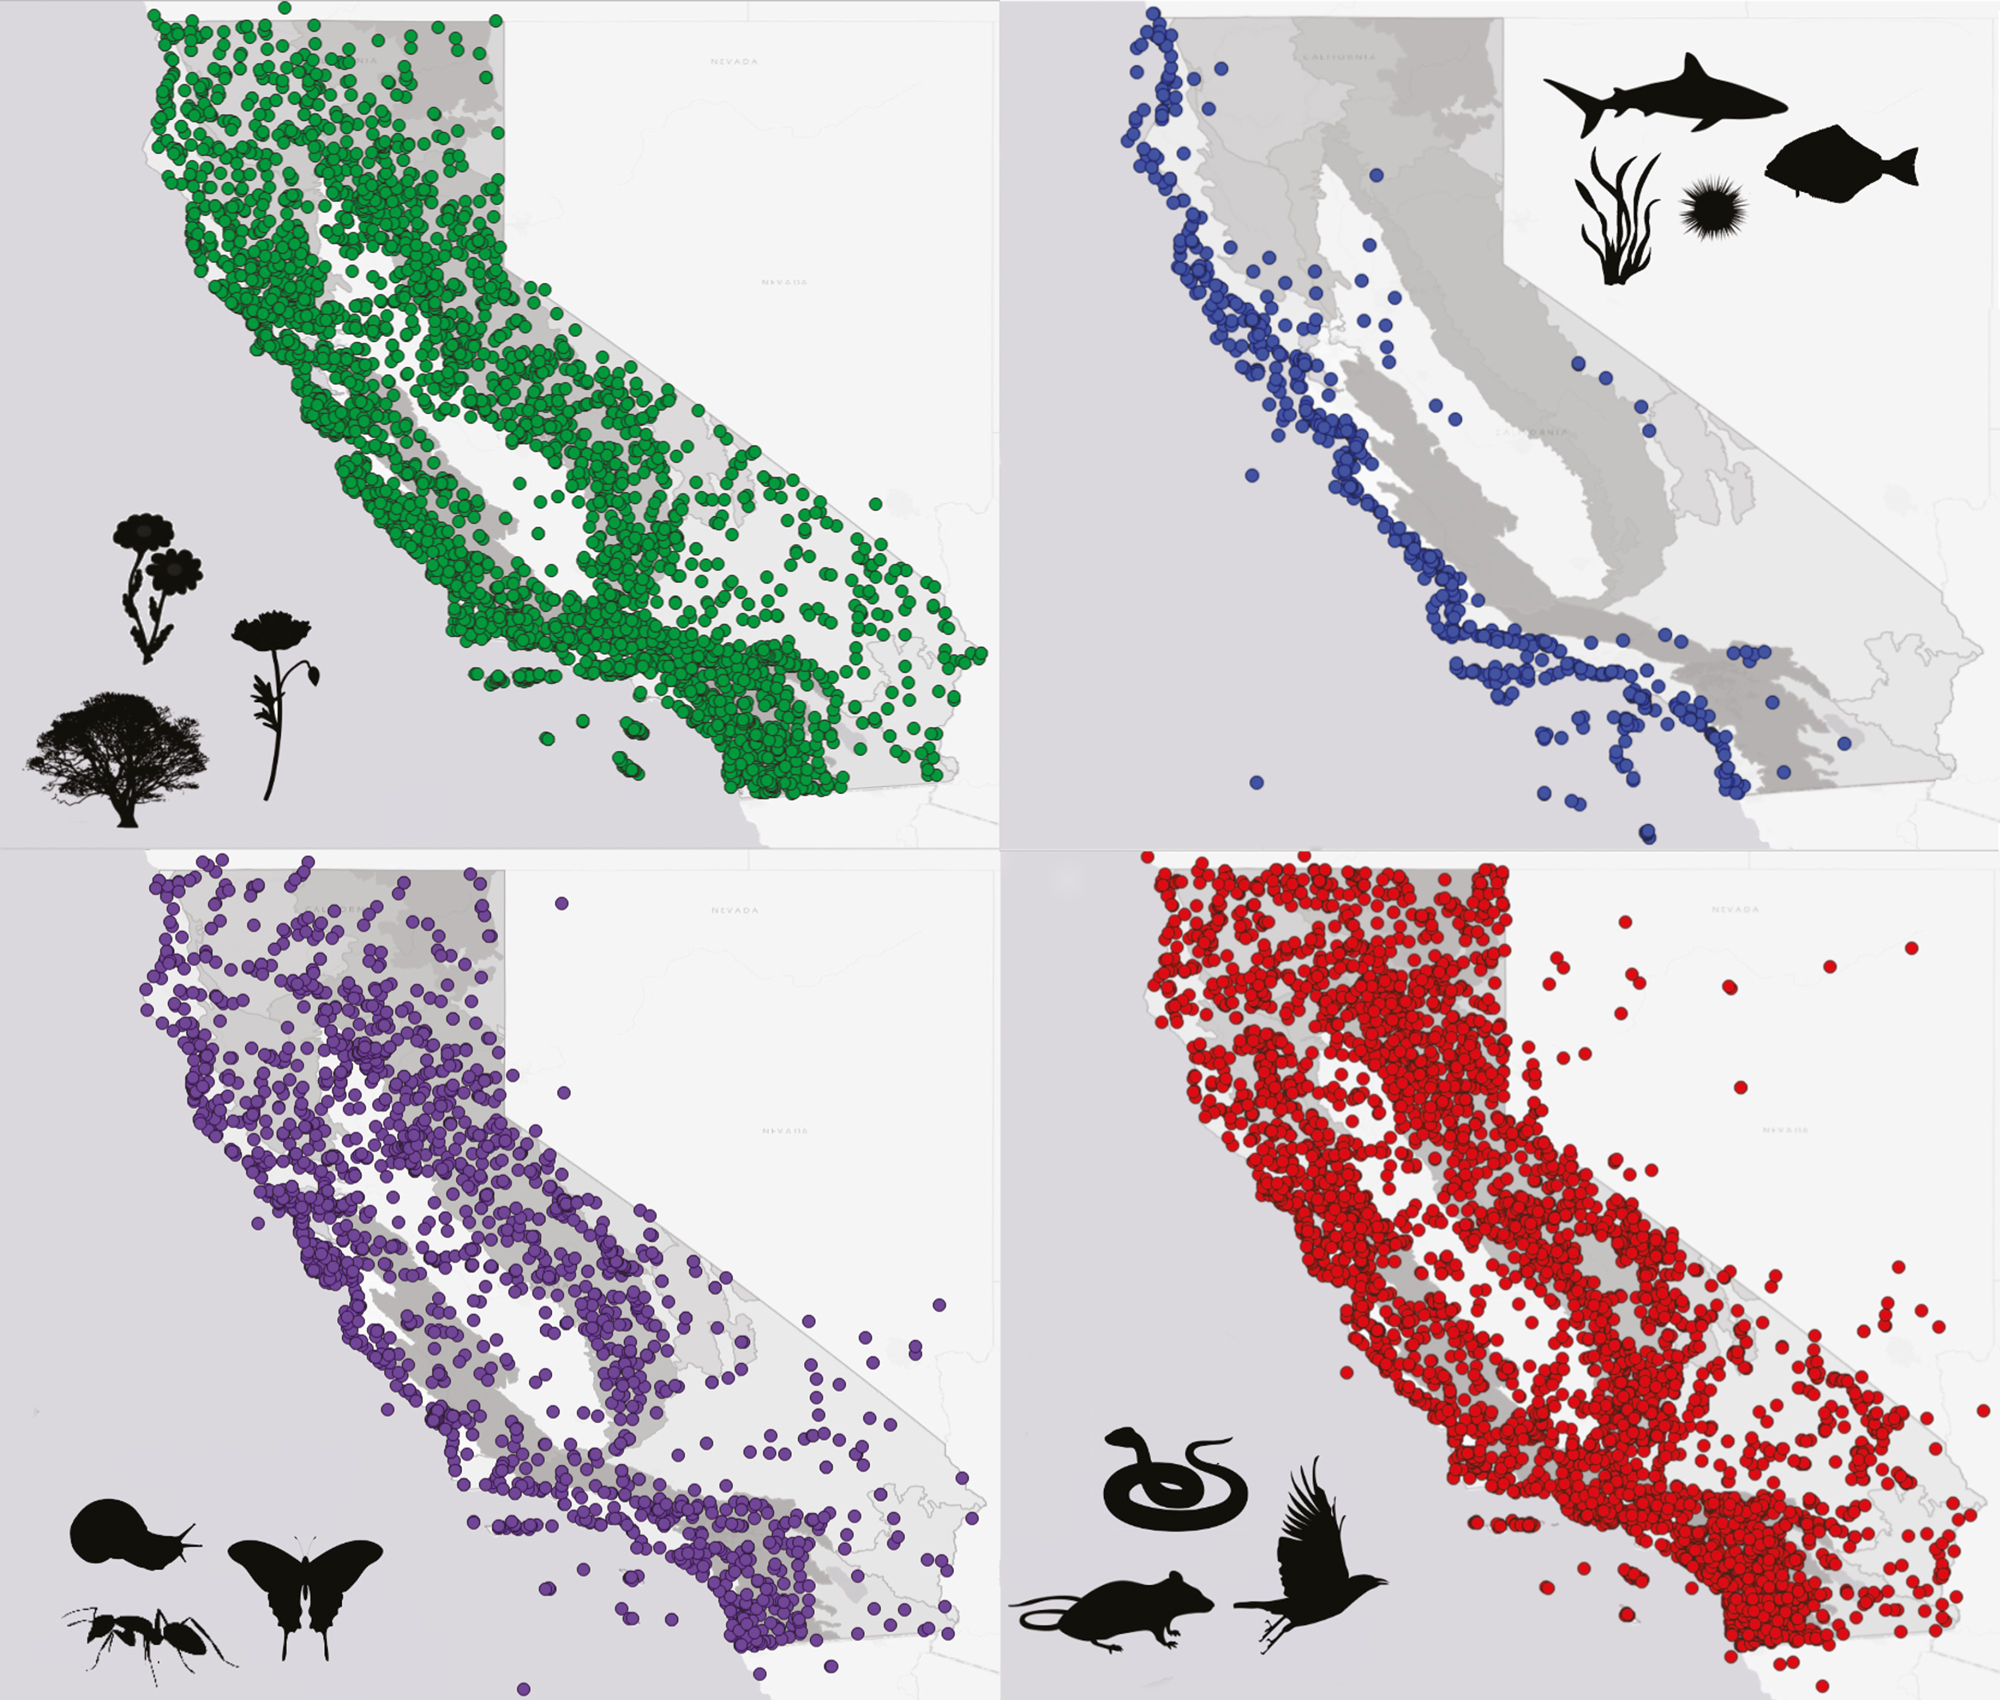 Four colorful maps expressing population patterns of plants, marine life, insects and birds and land animals